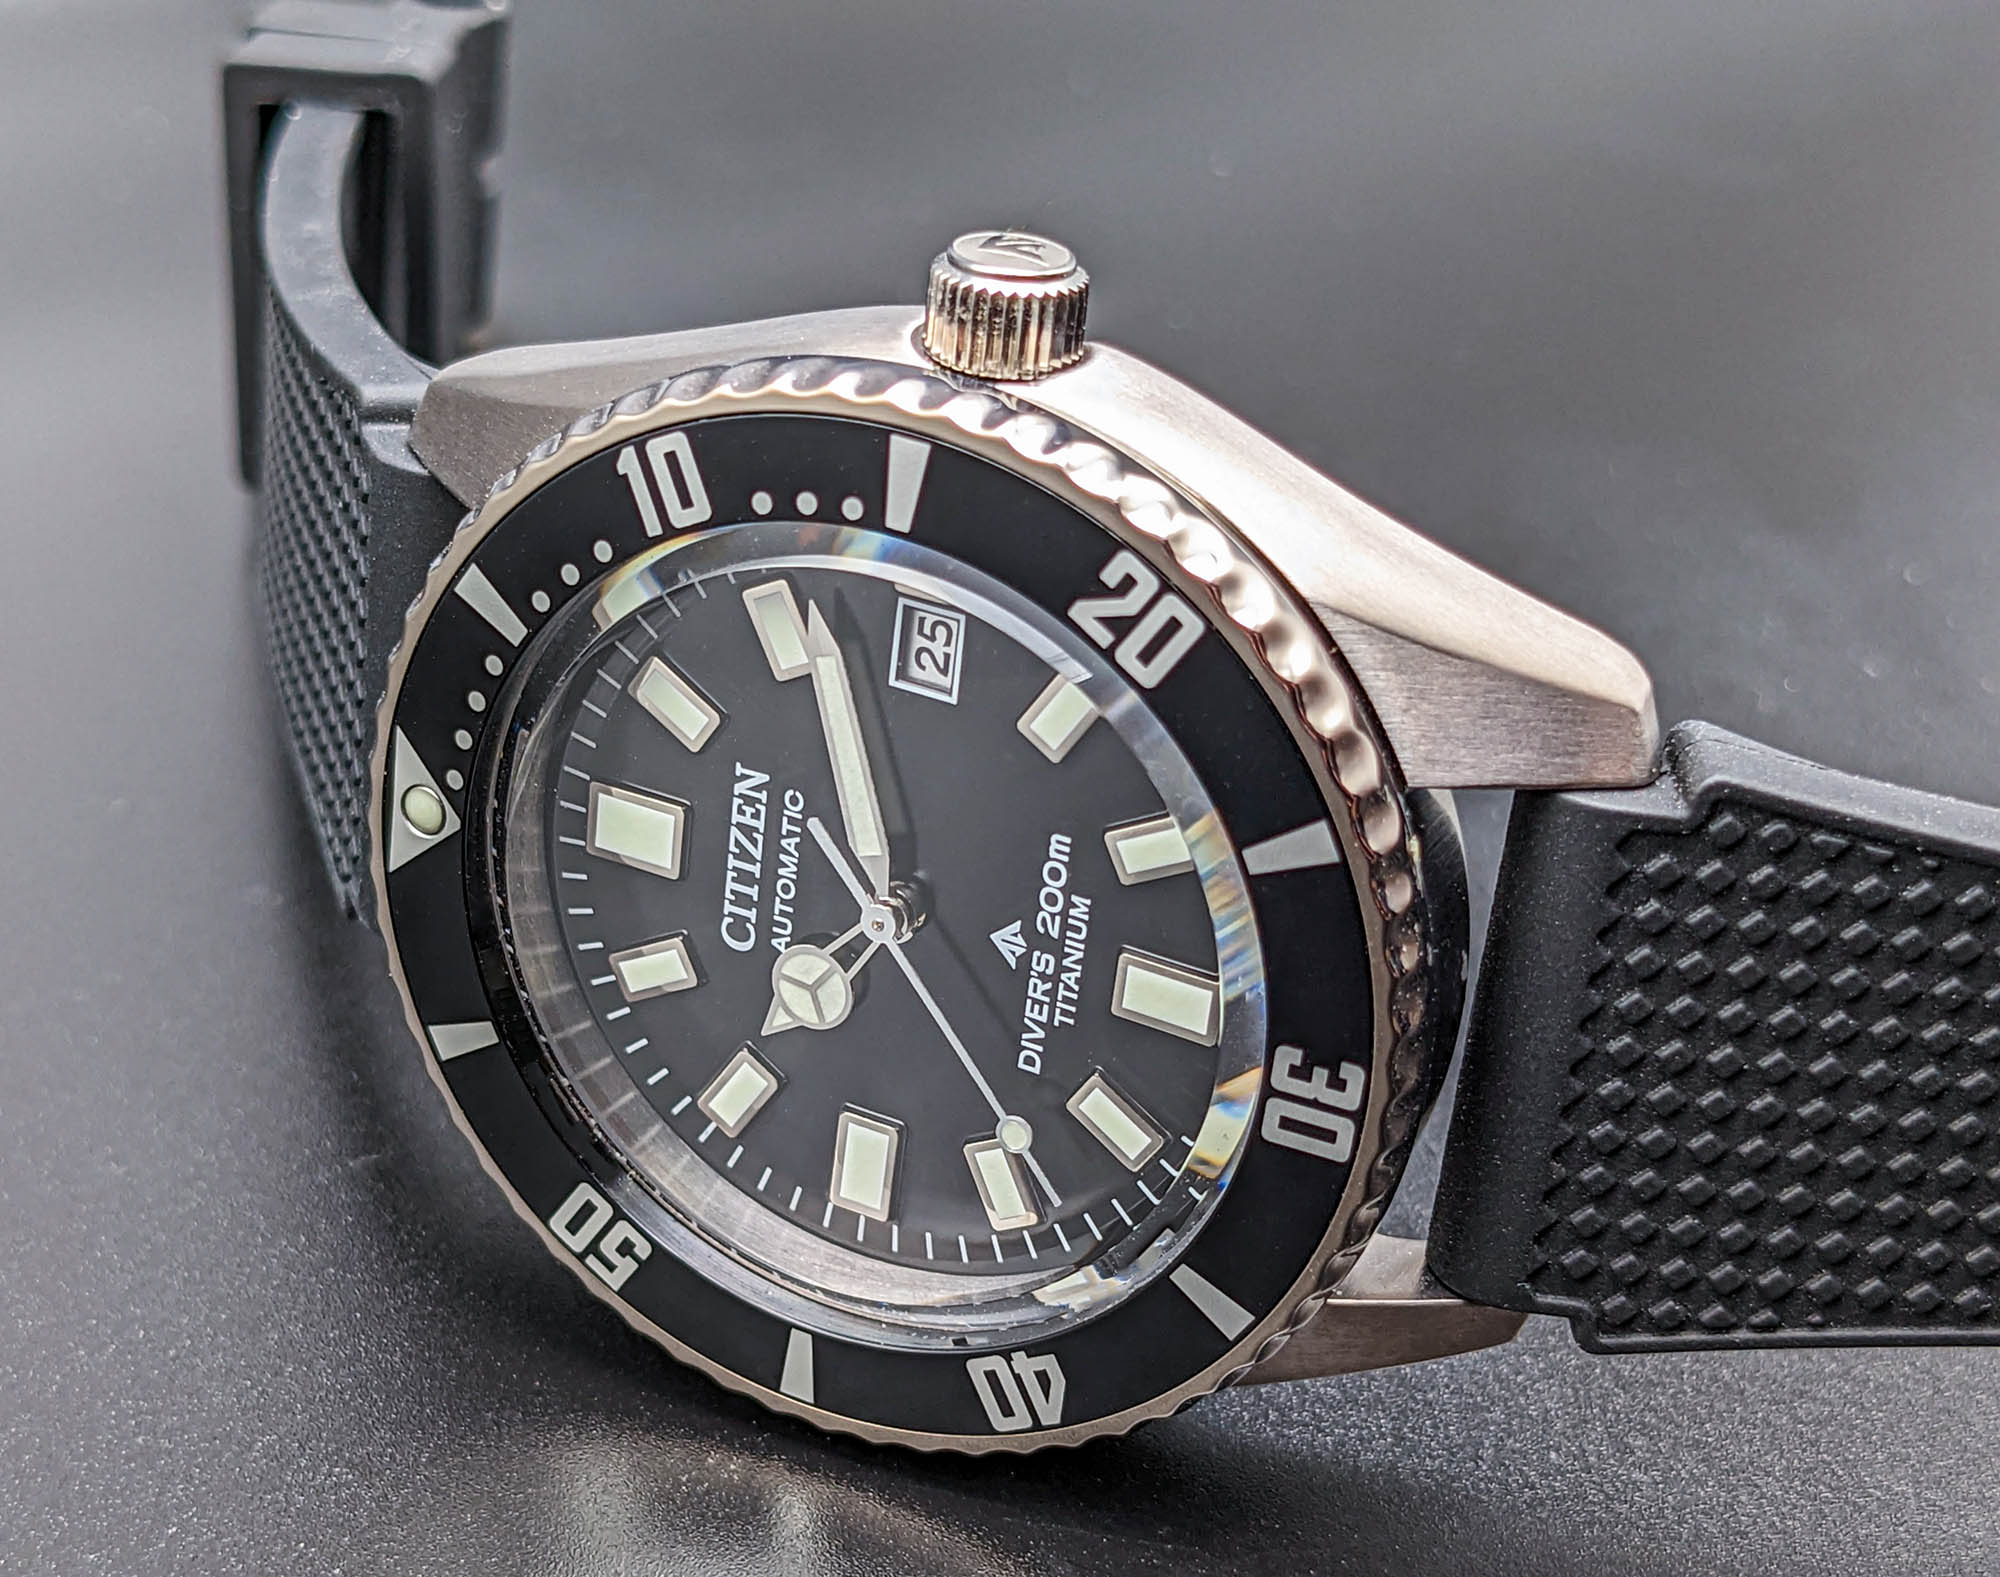 Review: Promaster Mechanical Diver 200m |